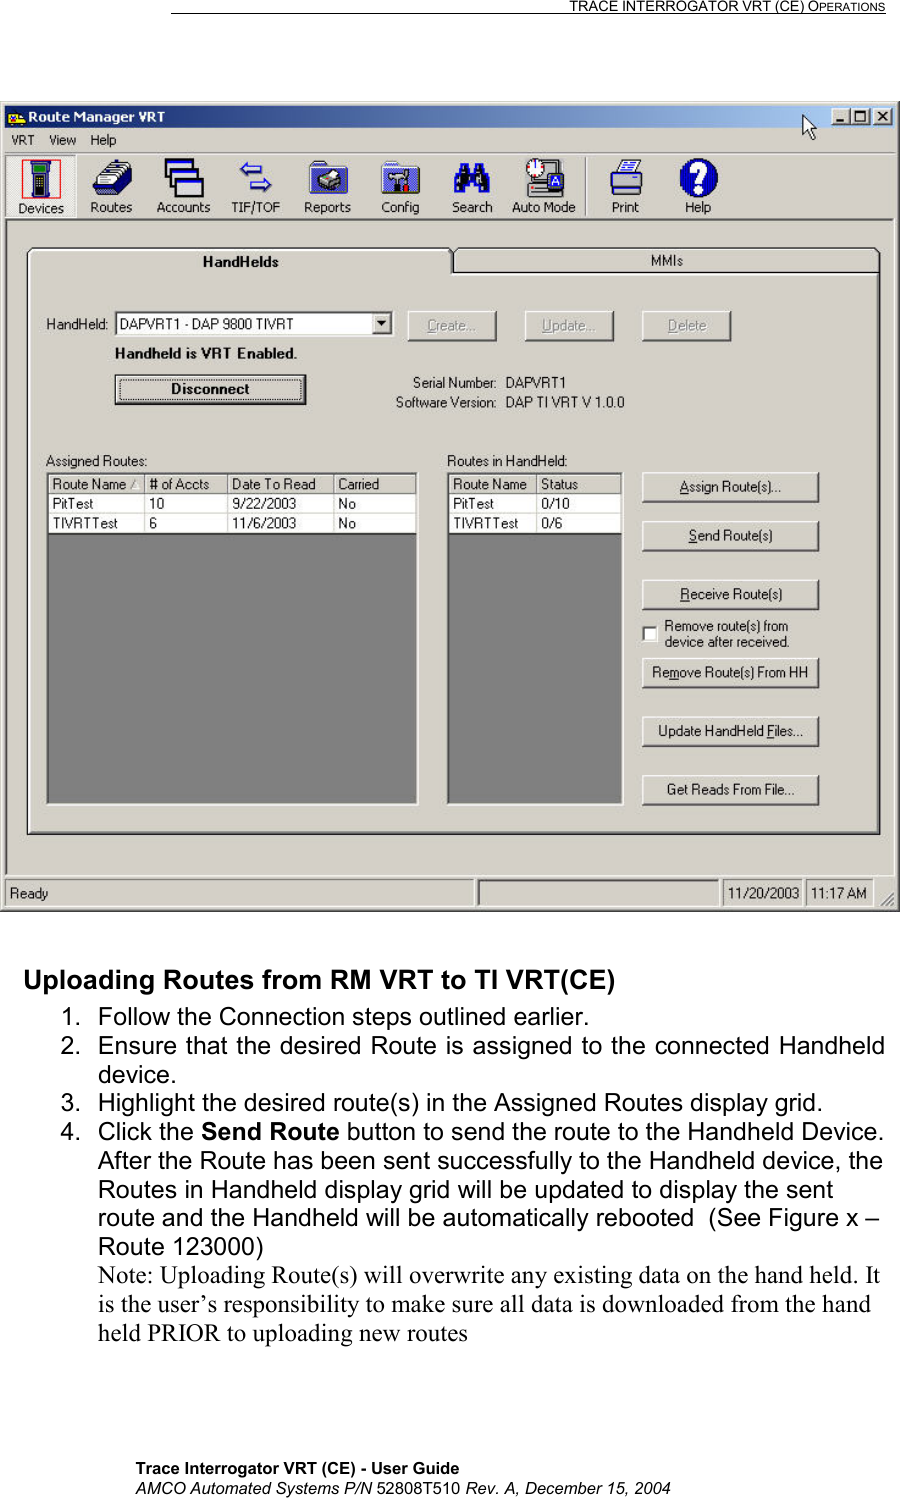                                                                                                                              TRACE INTERROGATOR VRT (CE) OPERATIONS    Trace Interrogator VRT (CE) - User Guide AMCO Automated Systems P/N 52808T510 Rev. A, December 15, 2004   Uploading Routes from RM VRT to TI VRT(CE) 1.  Follow the Connection steps outlined earlier. 2.  Ensure that the desired Route is assigned to the connected Handheld device. 3.  Highlight the desired route(s) in the Assigned Routes display grid. 4. Click the Send Route button to send the route to the Handheld Device. After the Route has been sent successfully to the Handheld device, the Routes in Handheld display grid will be updated to display the sent route and the Handheld will be automatically rebooted  (See Figure x – Route 123000) Note: Uploading Route(s) will overwrite any existing data on the hand held. It is the user’s responsibility to make sure all data is downloaded from the hand held PRIOR to uploading new routes 